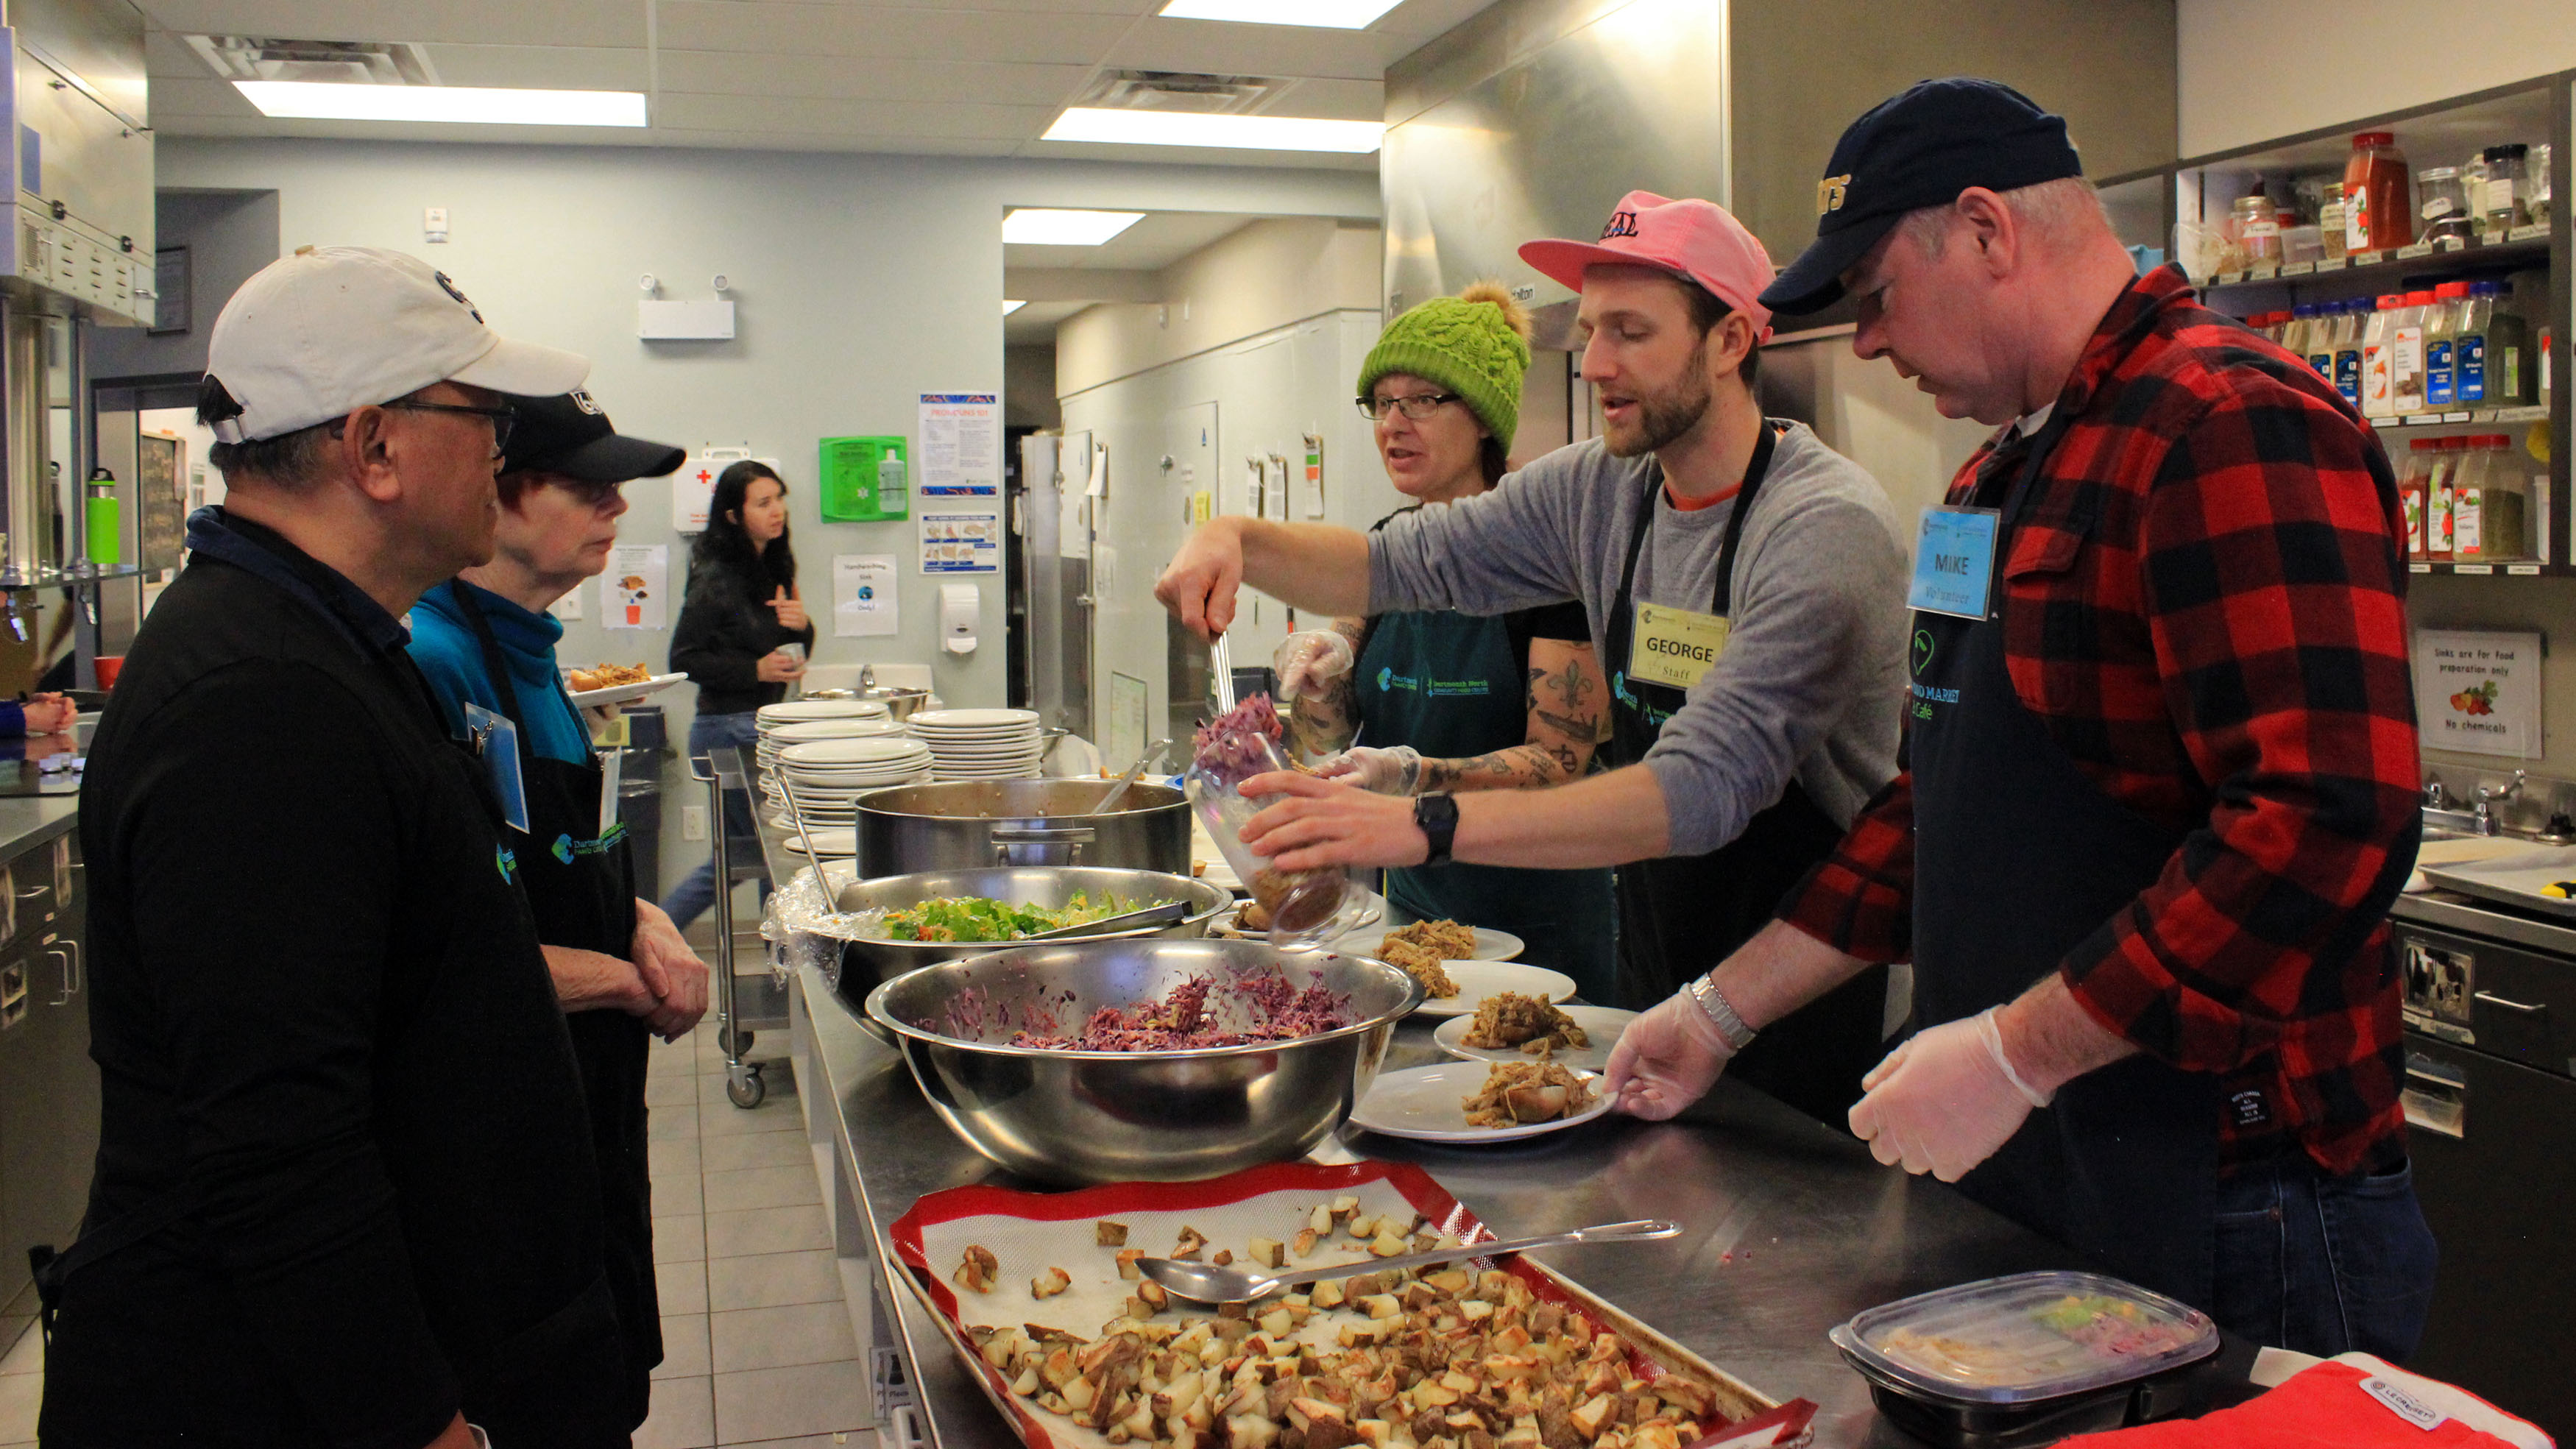 Food access coordinator George Shannon (second from right), leads a team of volunteers who help prepare community meals three days a week at the Dartmouth North Community Food Centre.